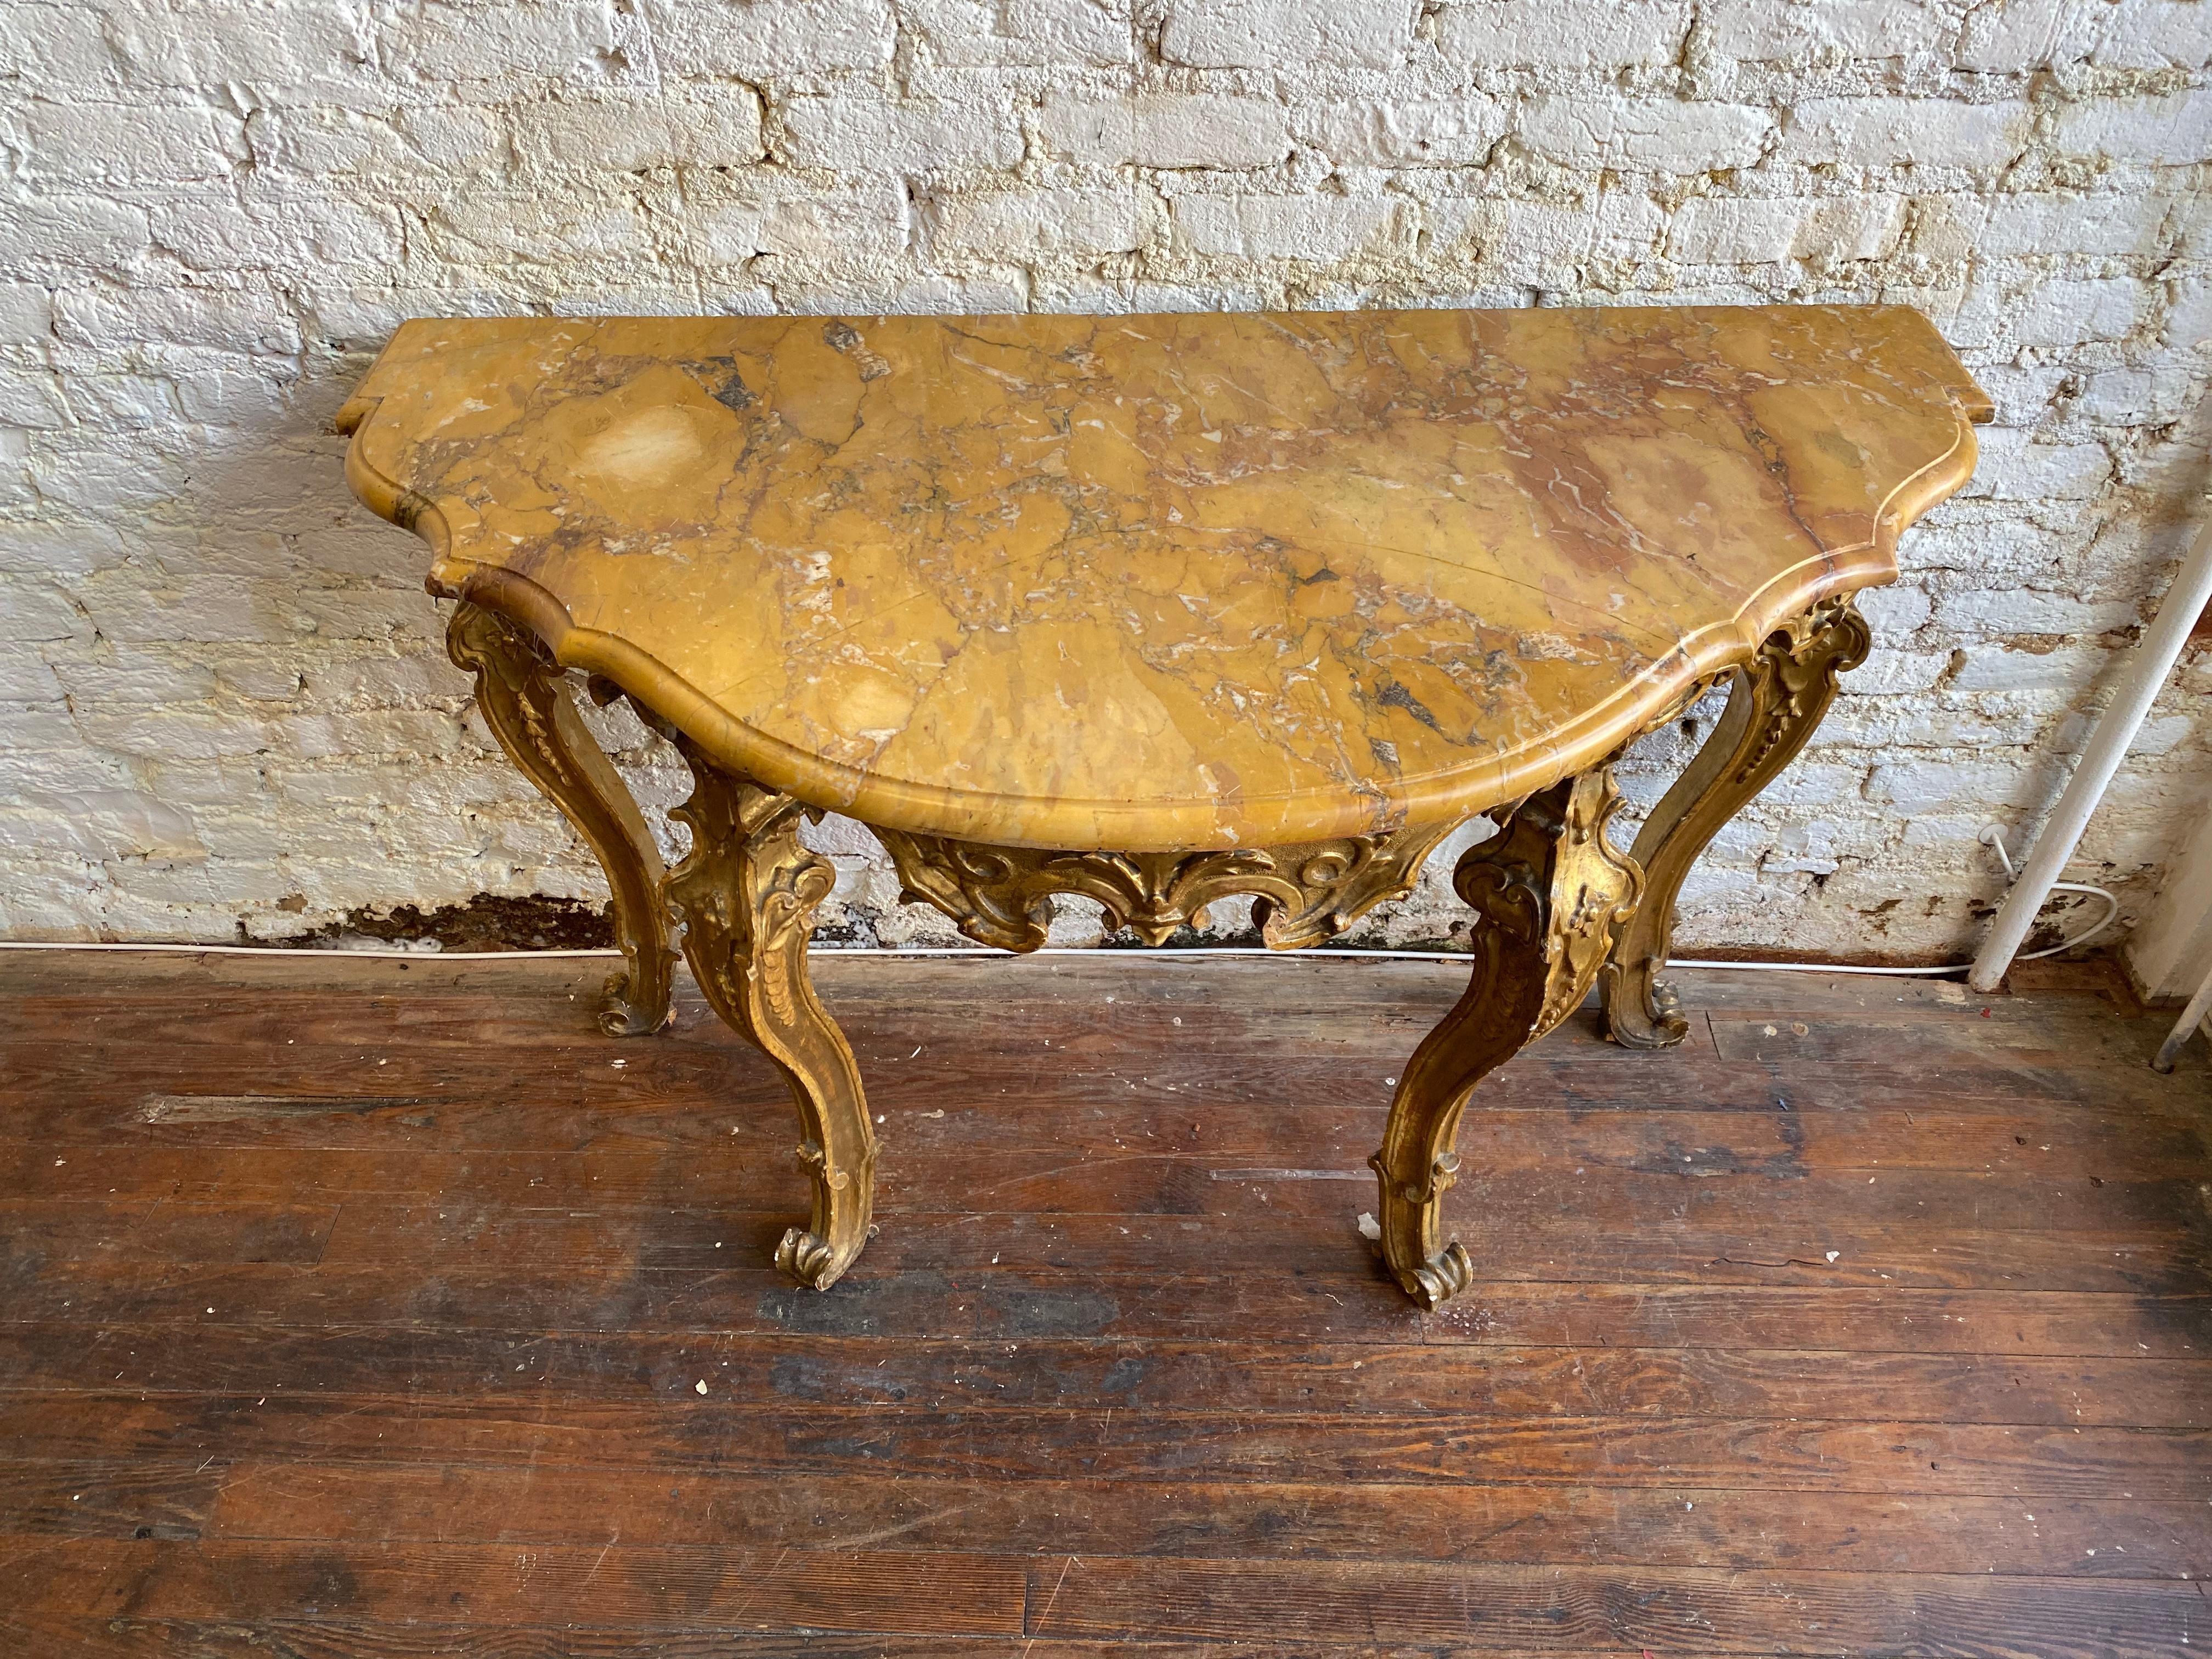 Wonderful early 18th century Italian Rococo giltwood console with Siena marble top. Free standing console with incredible quality carving. Price tag from the previous owner still in tact- $85,000.